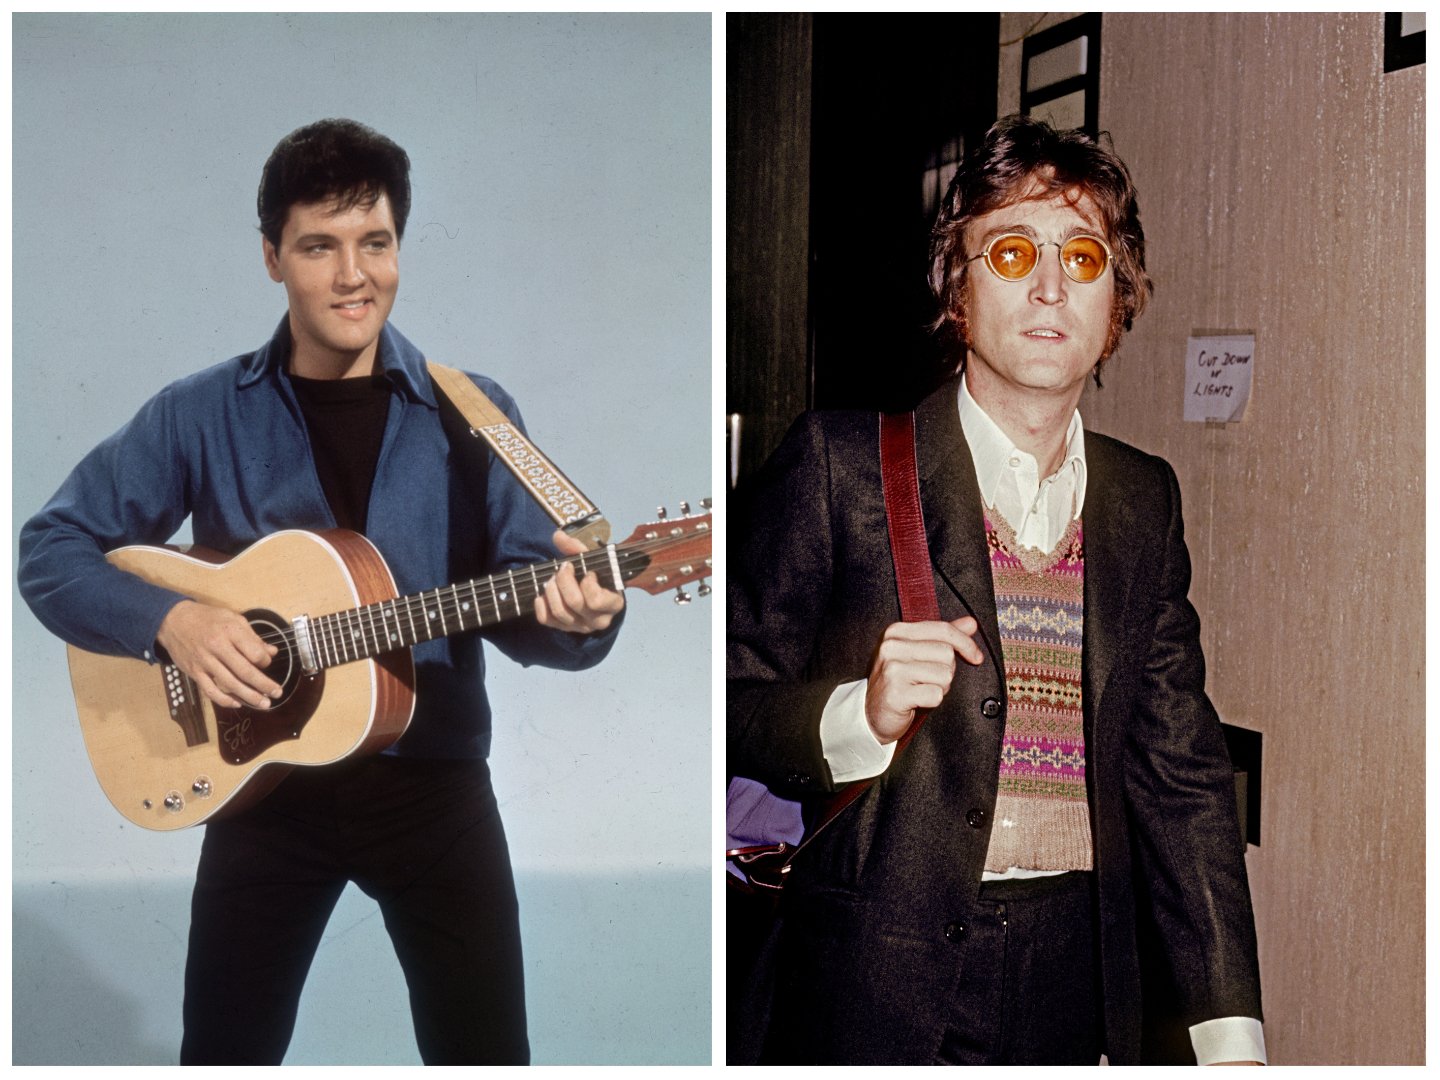 Elvis holds a guitar. John Lennon carries a bag over his shoulder and wears sunglasses.